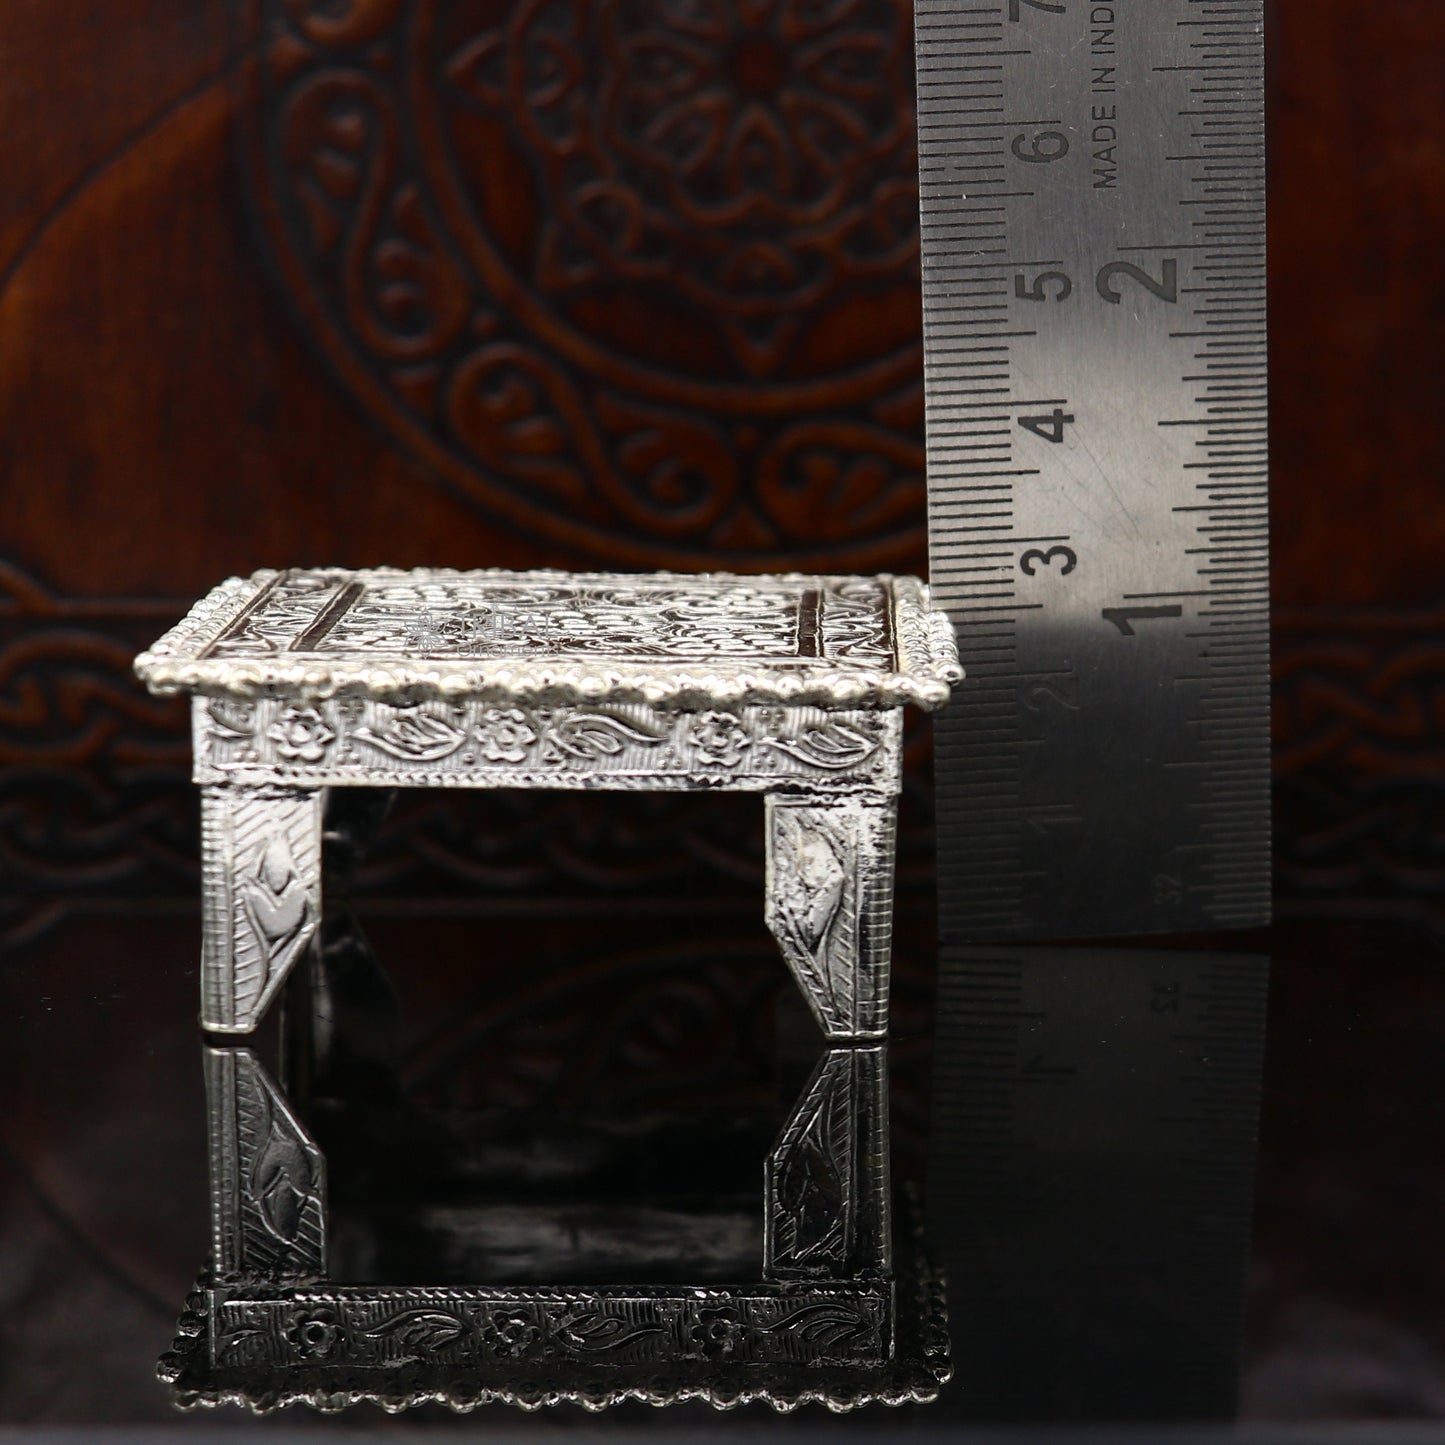 2" Vintage design Sterling silver handmade customize small square shape table/bazot/chouki, excellent home puja utensils temple art su1198 - TRIBAL ORNAMENTS